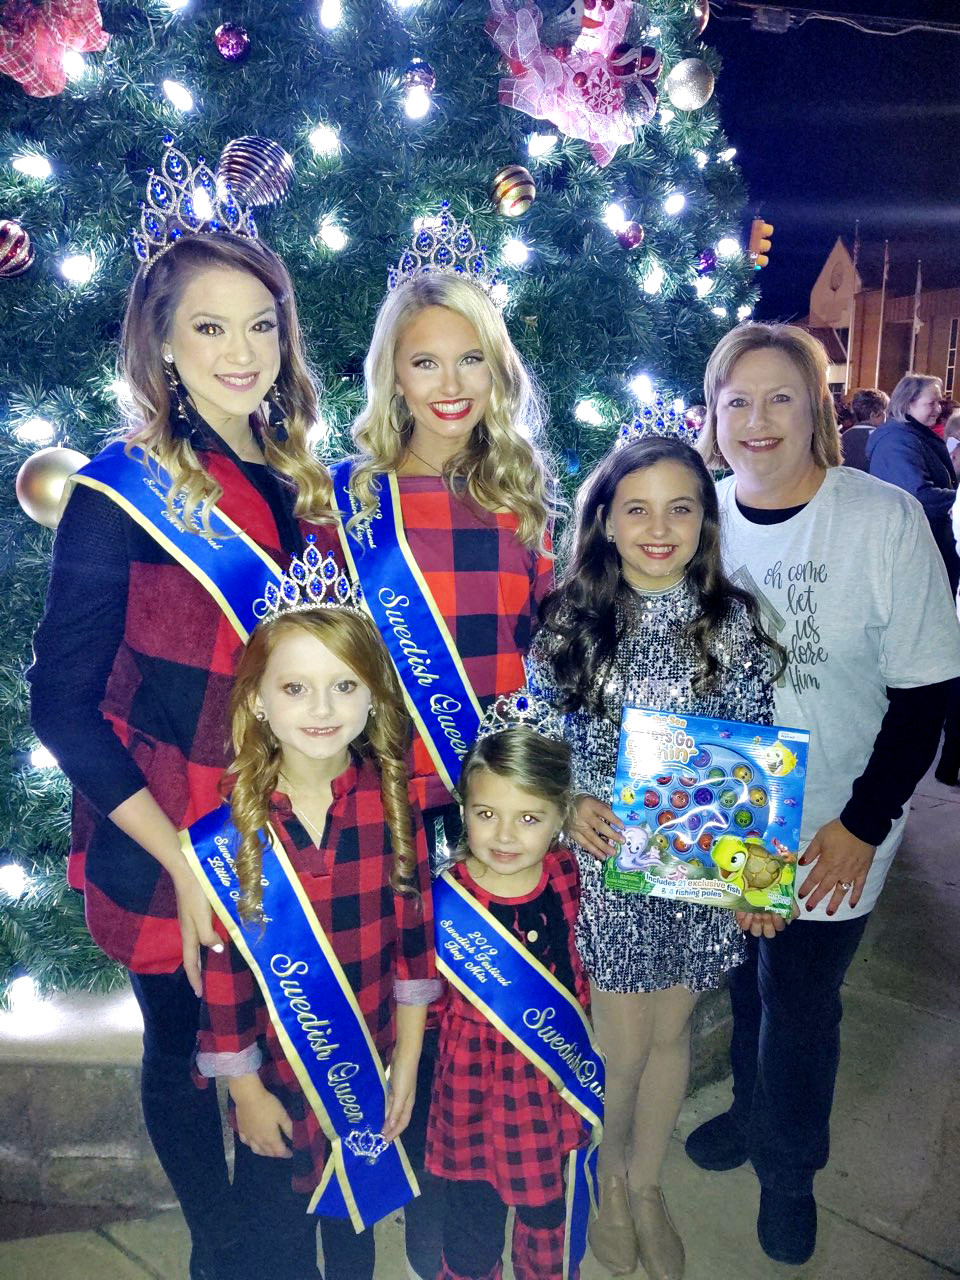 Swedish Queens donated to Circle of Love Toy Drive #EncoreRehab-Clanton